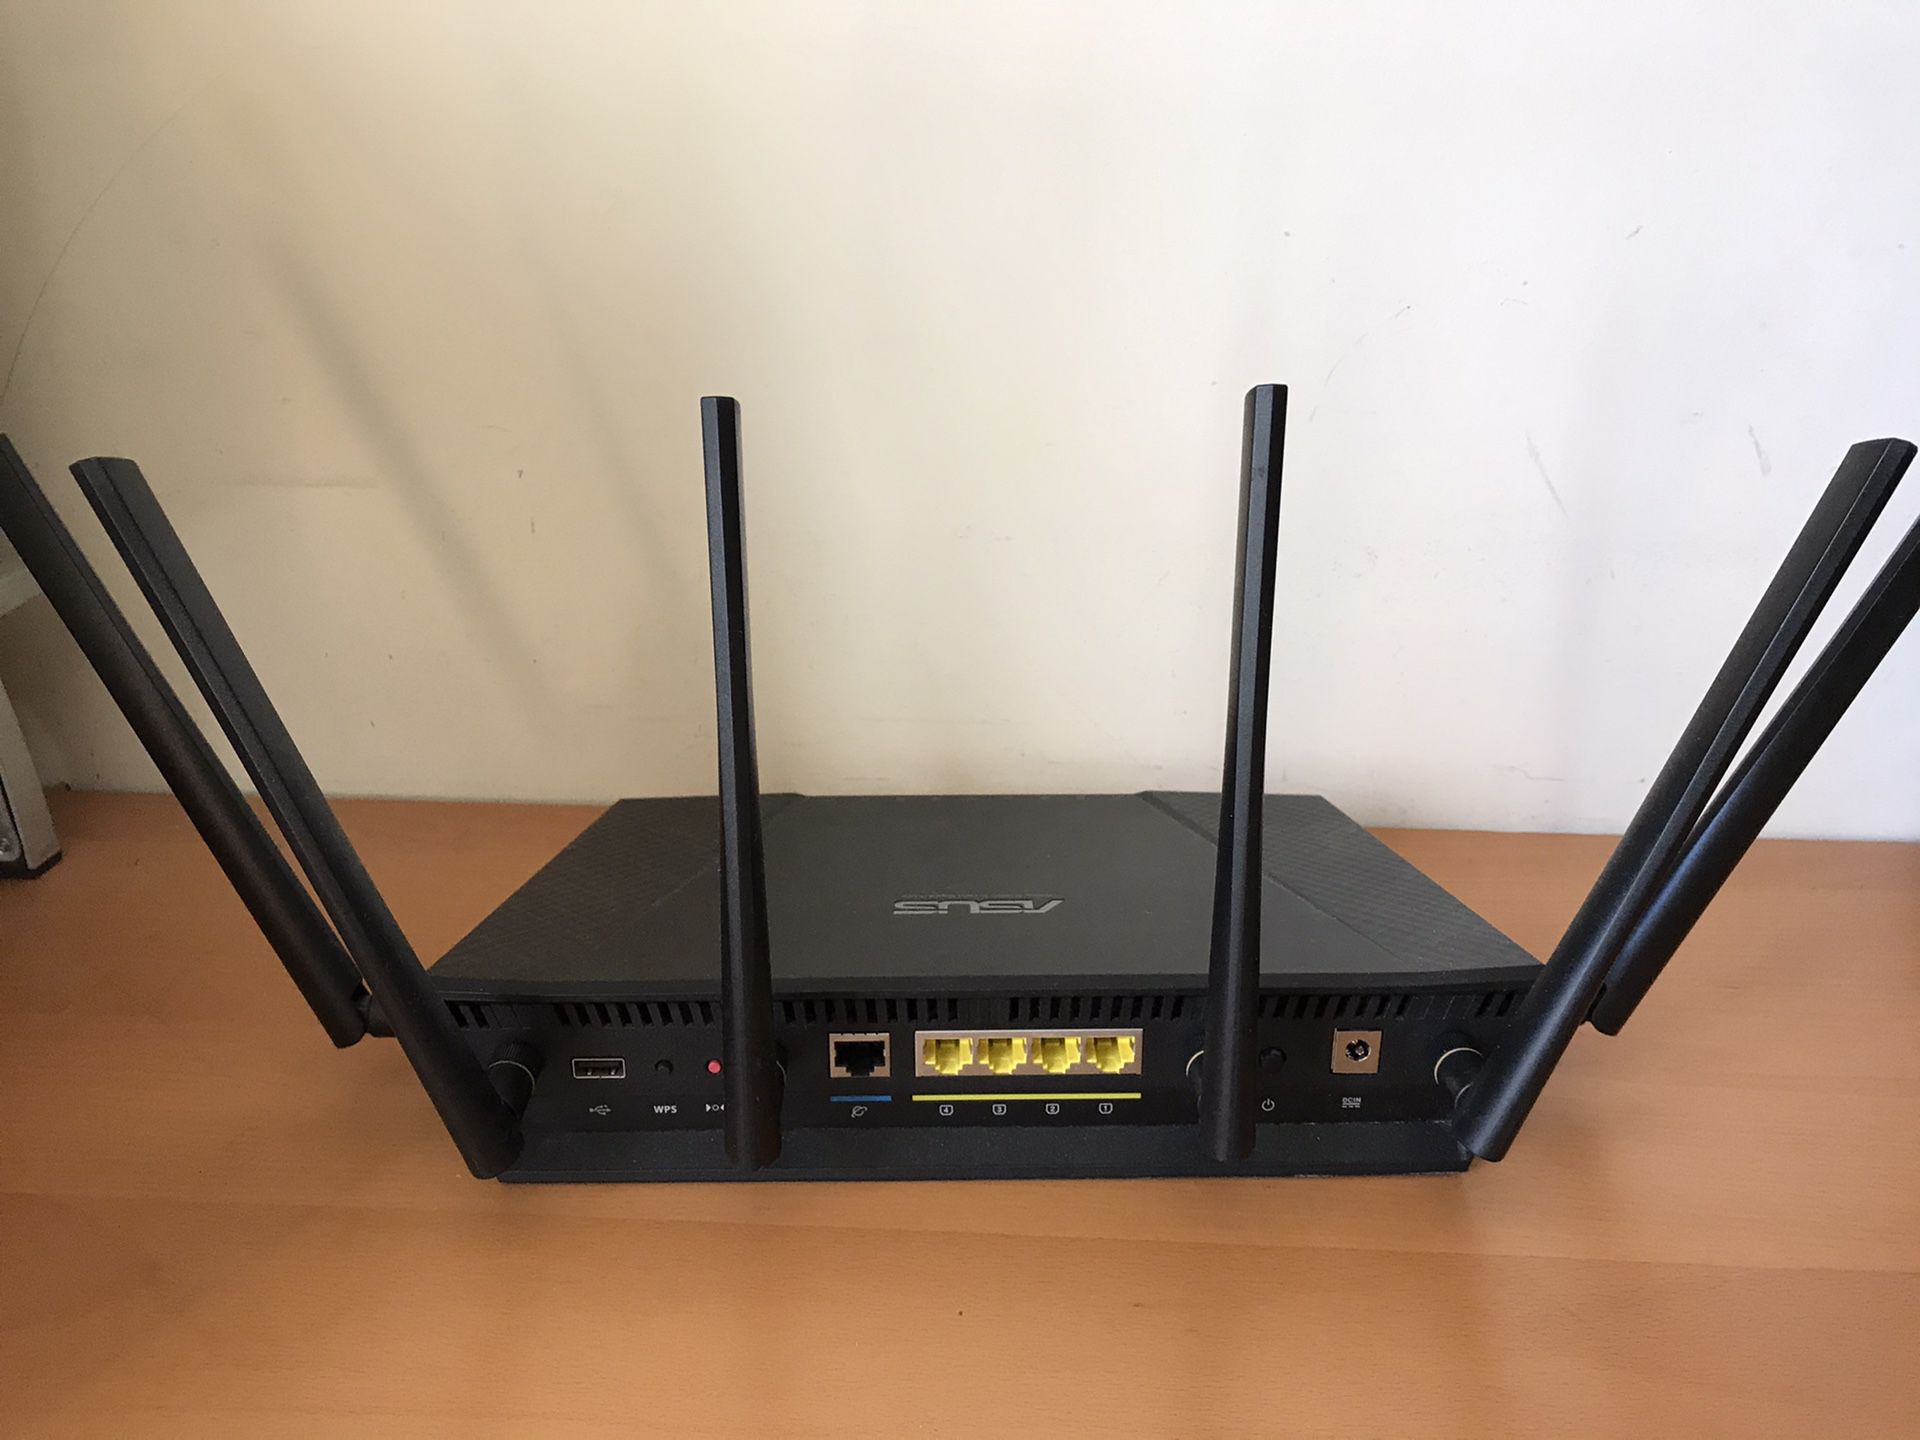 Asus RT AC3200 Triband Router